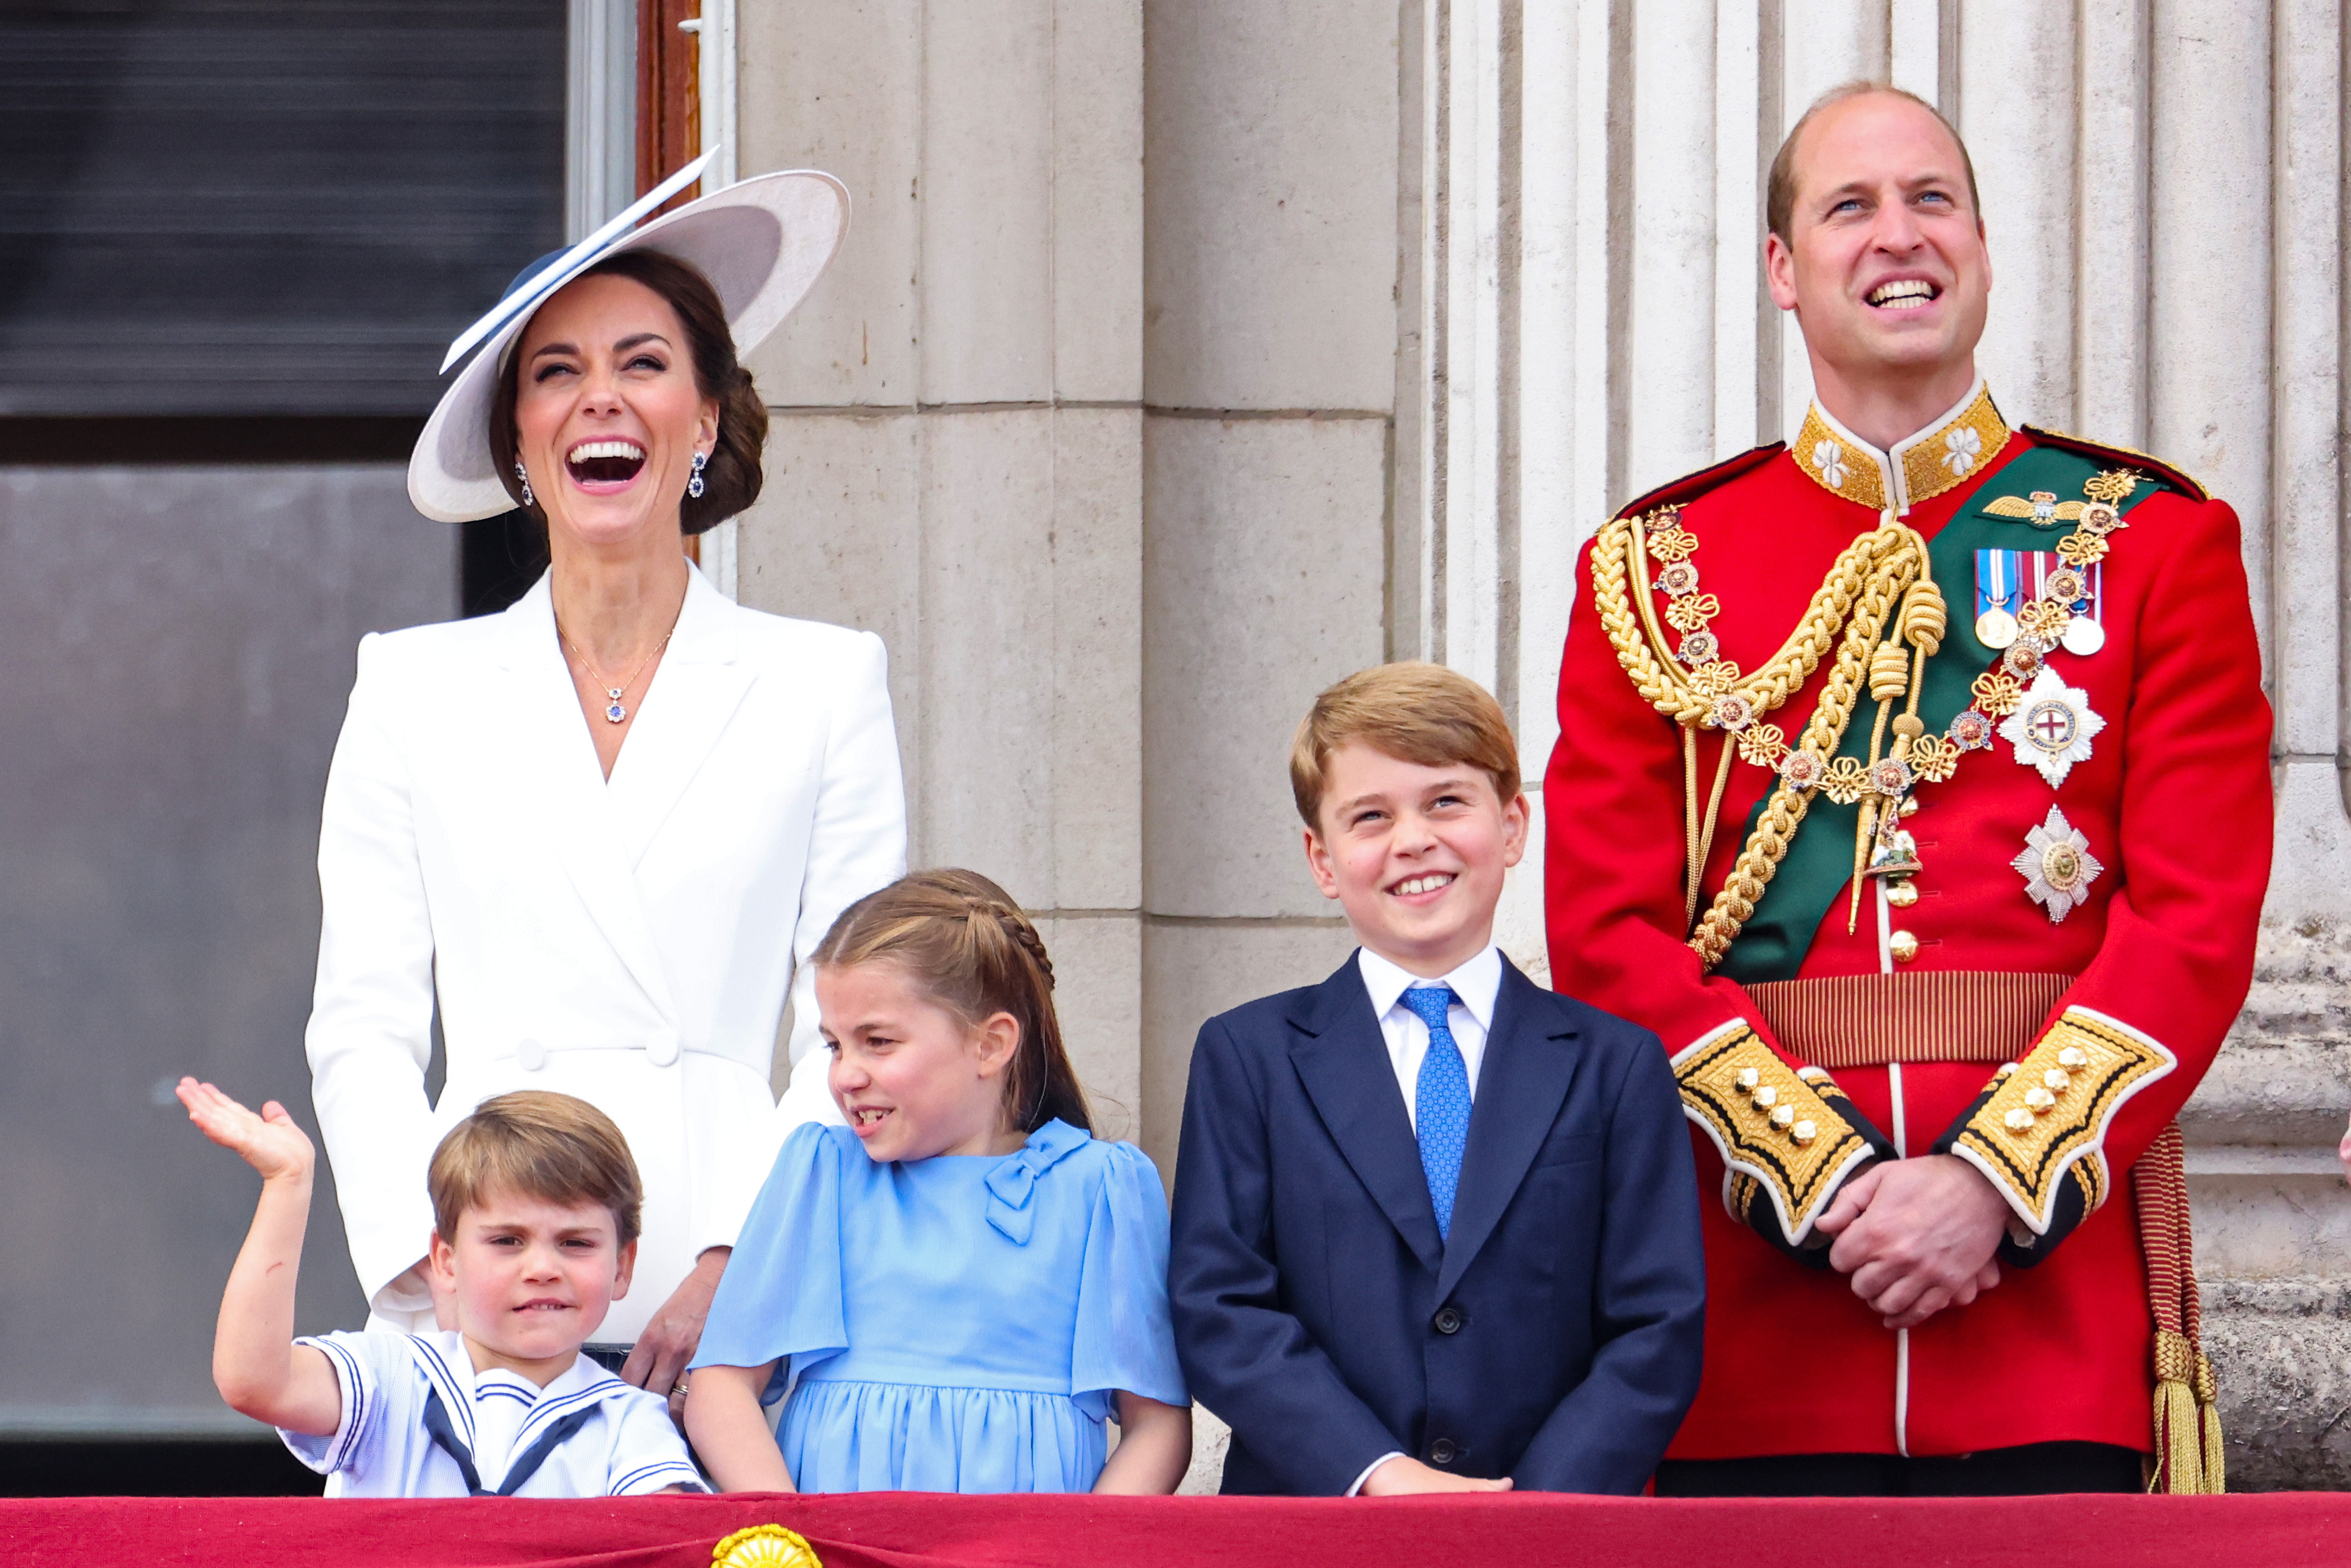 The Prince and Princess of Wales, with their children during the Trooping the Colour parade on June 02, 2022 in London, England | Source: Getty Images